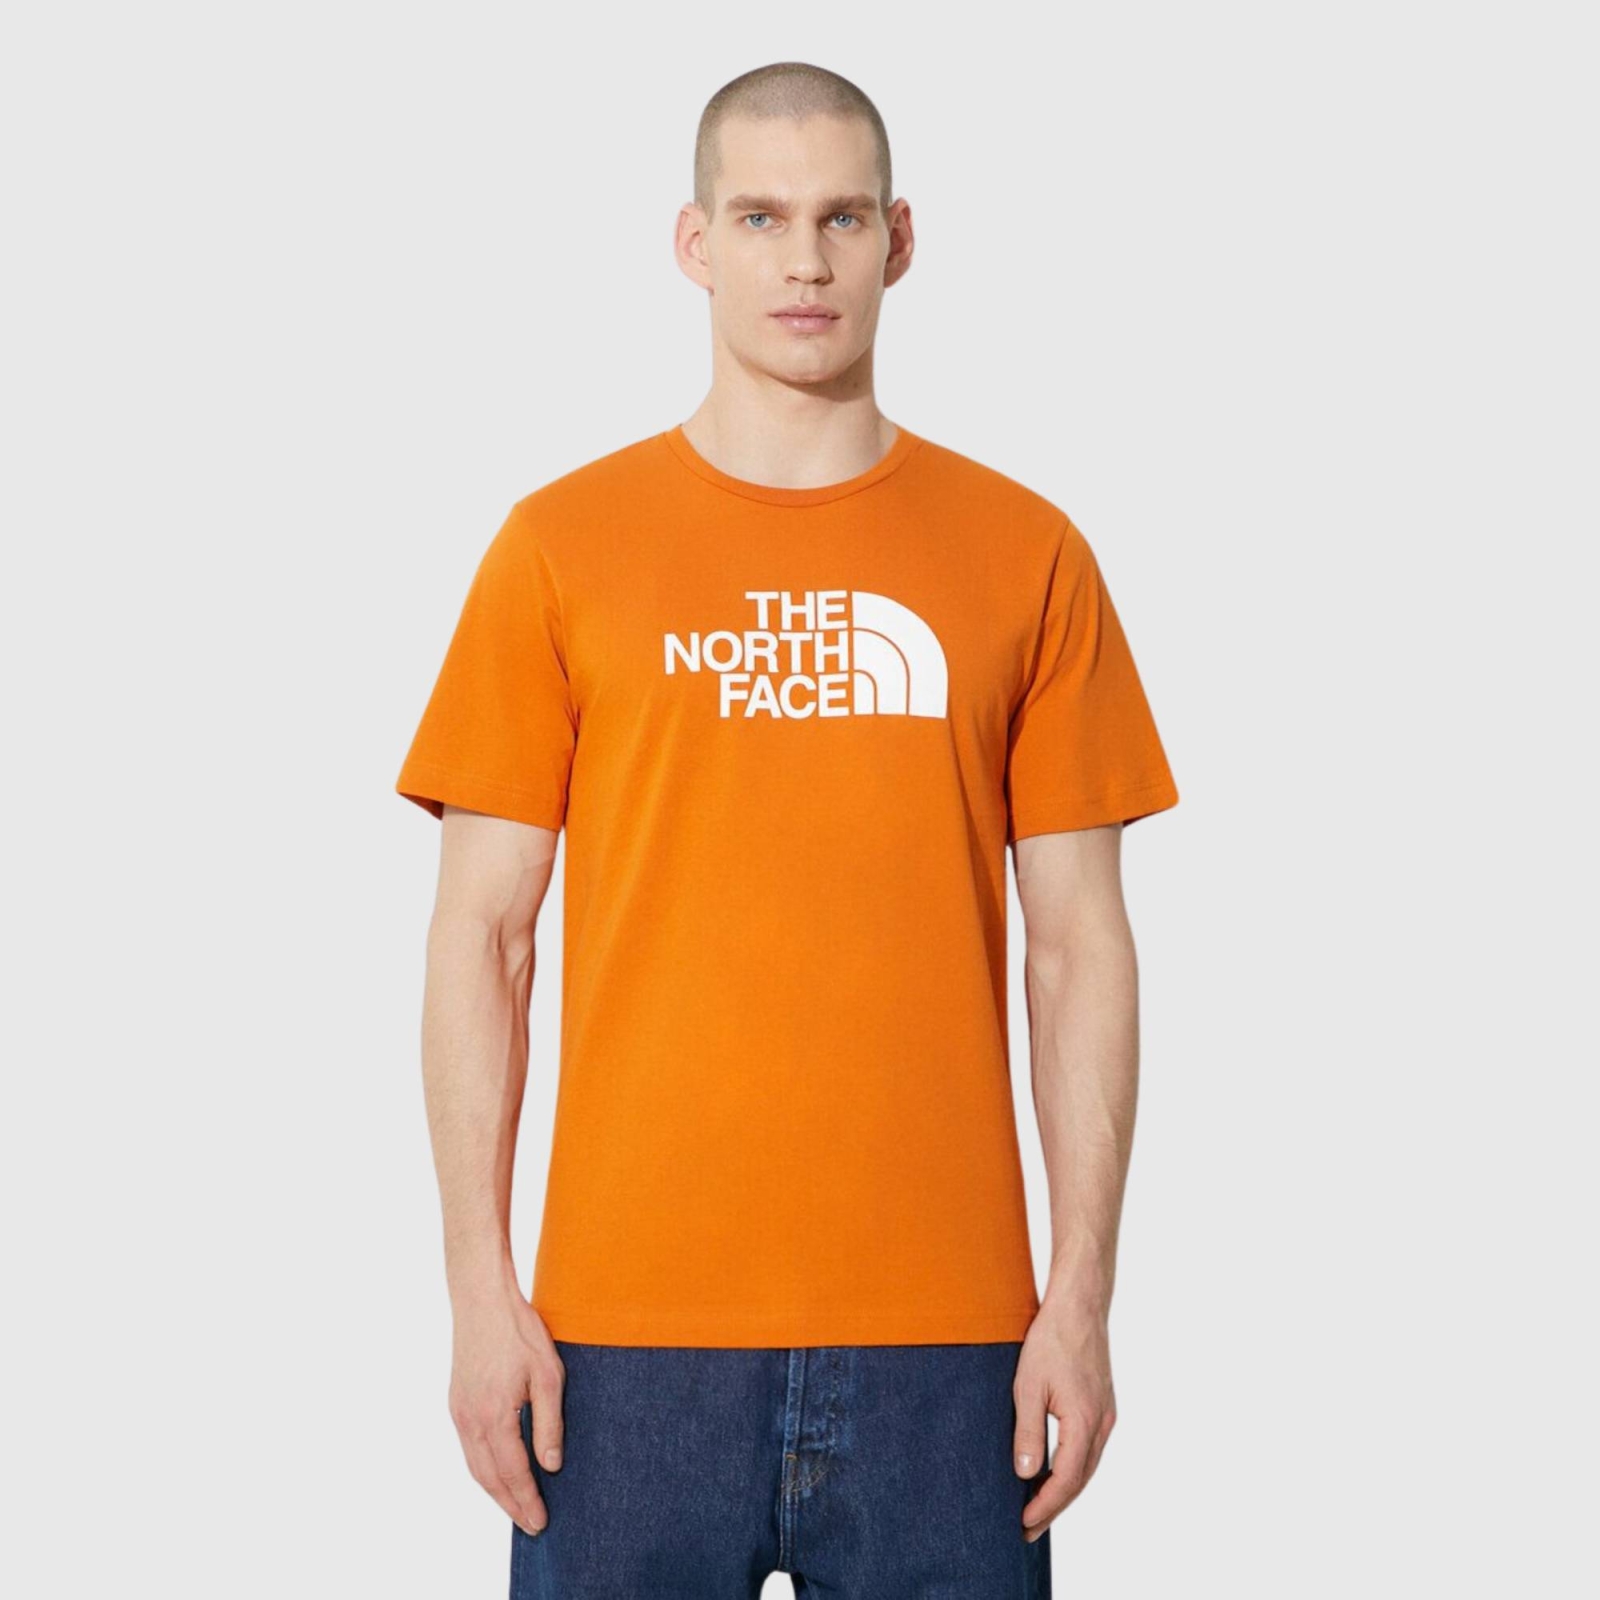 THE NORTH FACE MENS EASY TEE